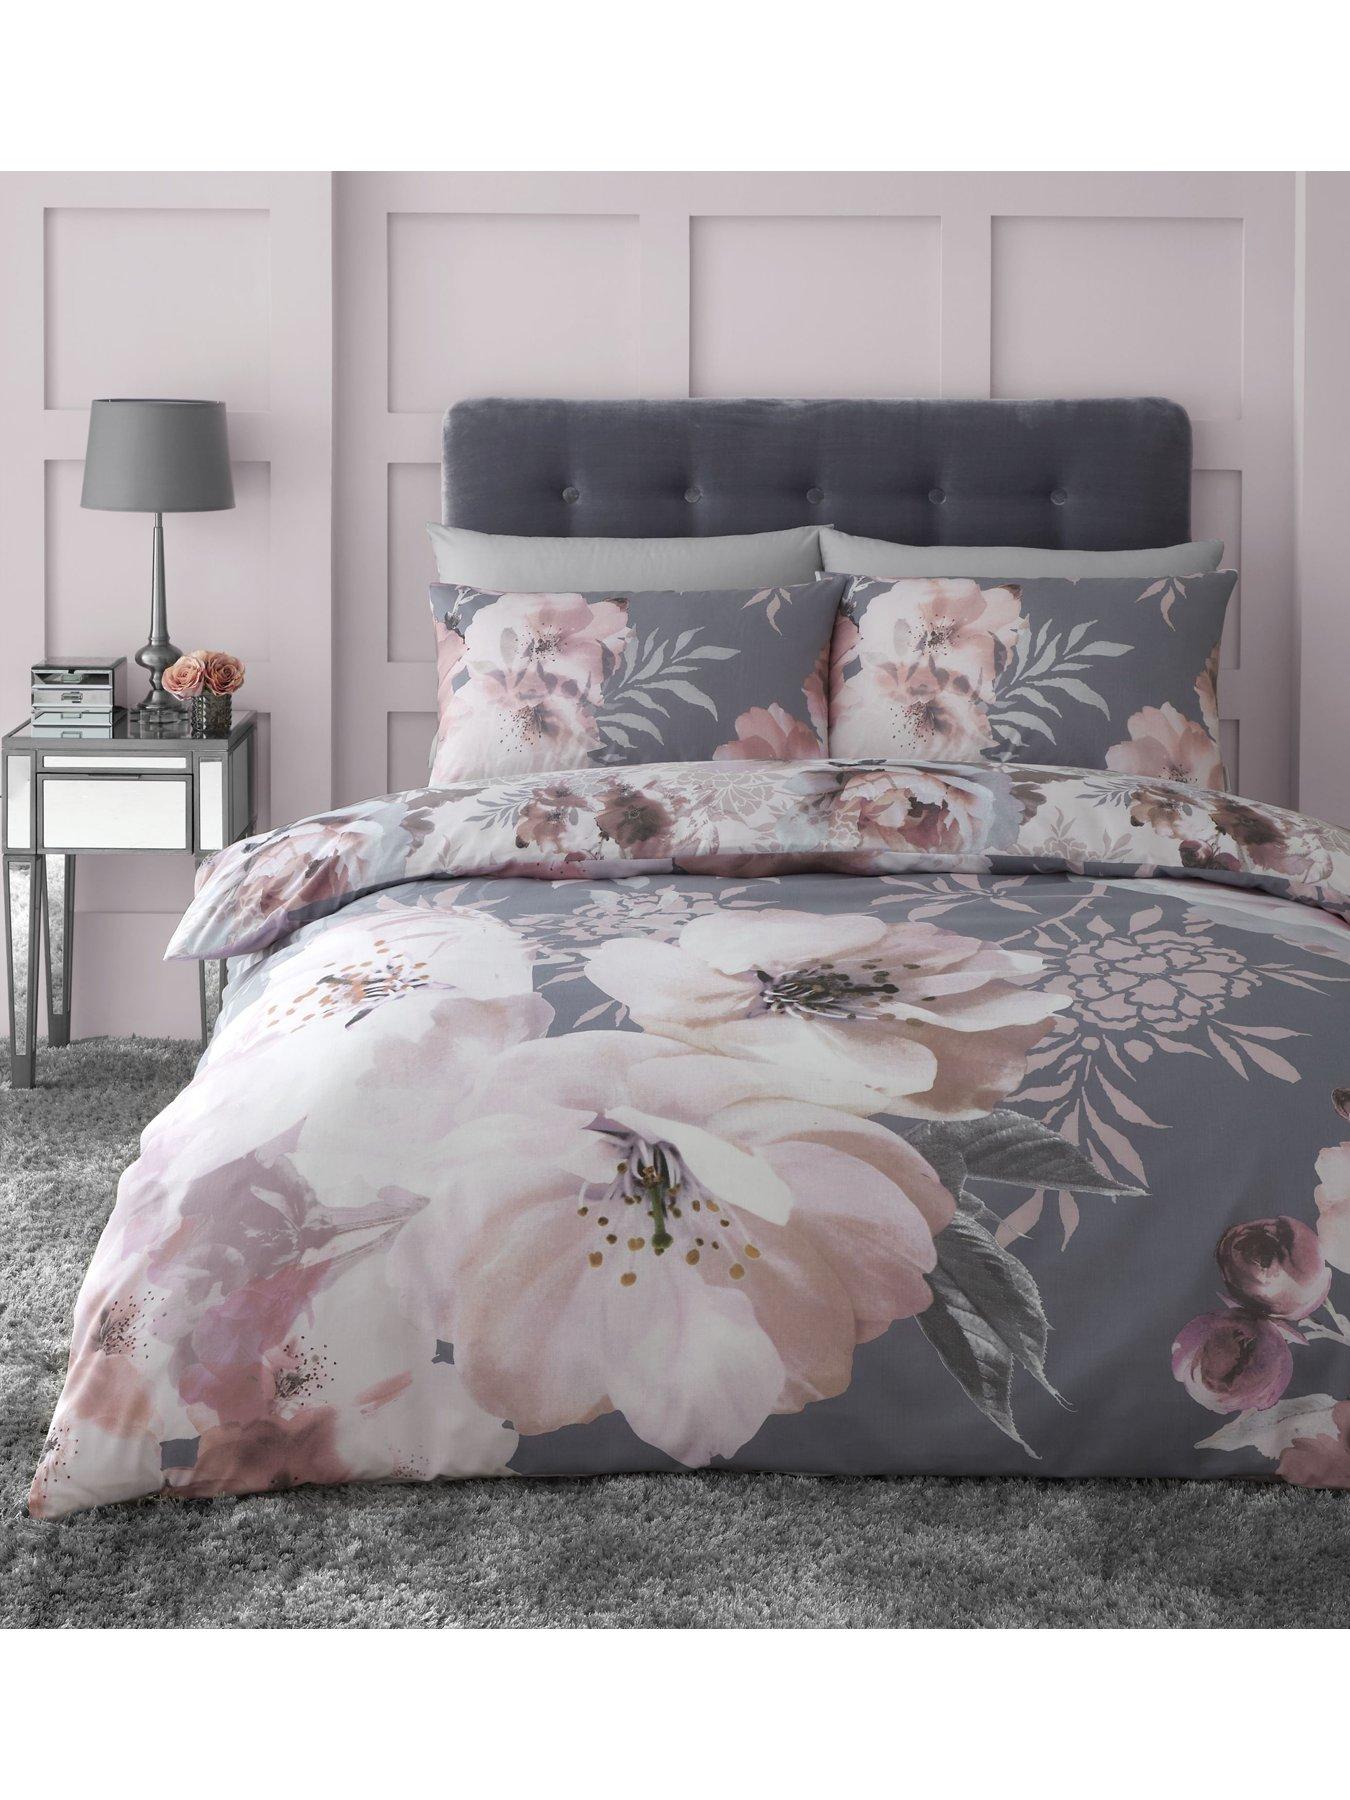 Catherine Lansfield Seersucker Banded Textured Cotton Rich Duvet Cover Bed  Set